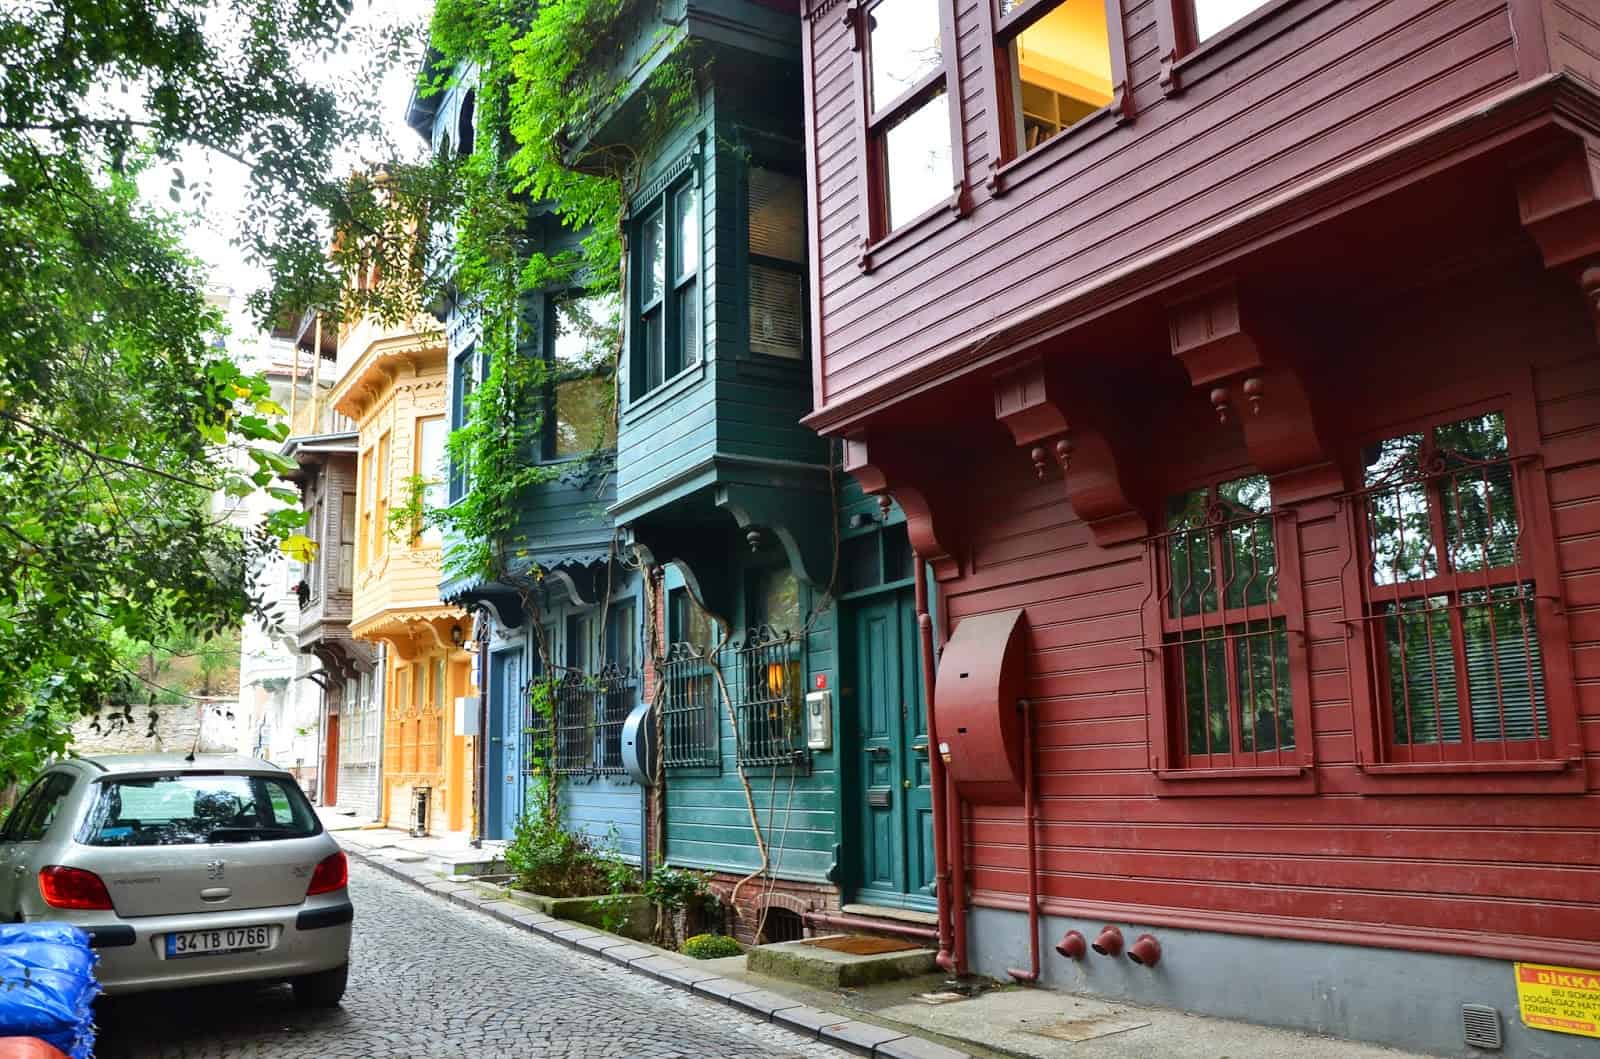 A row of colorful Ottoman homes in Kuzguncuk, Istanbul, Turkey